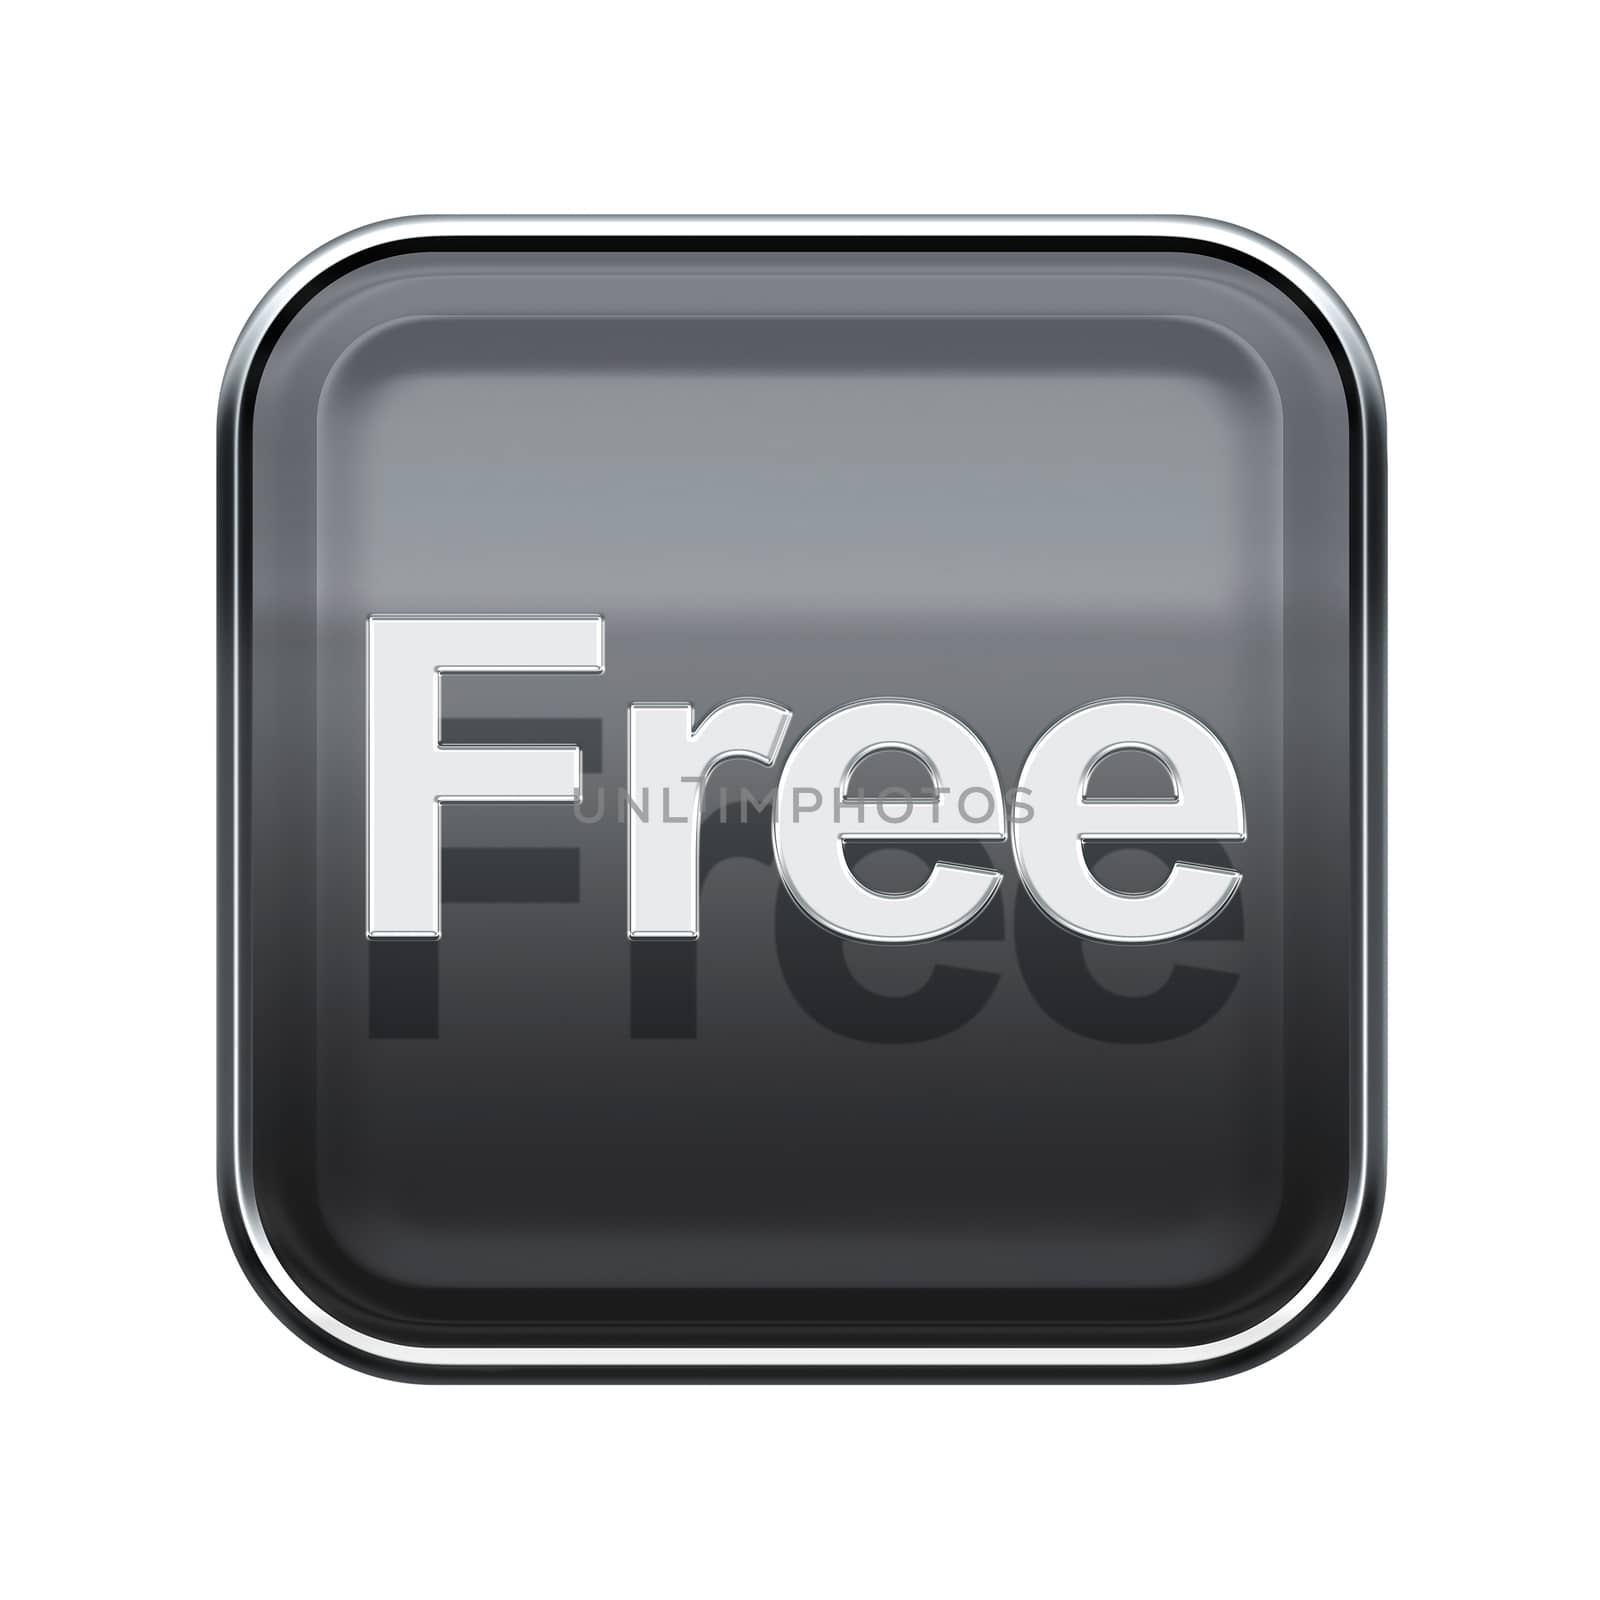 free icon glossy grey, isolated on white background by zeffss